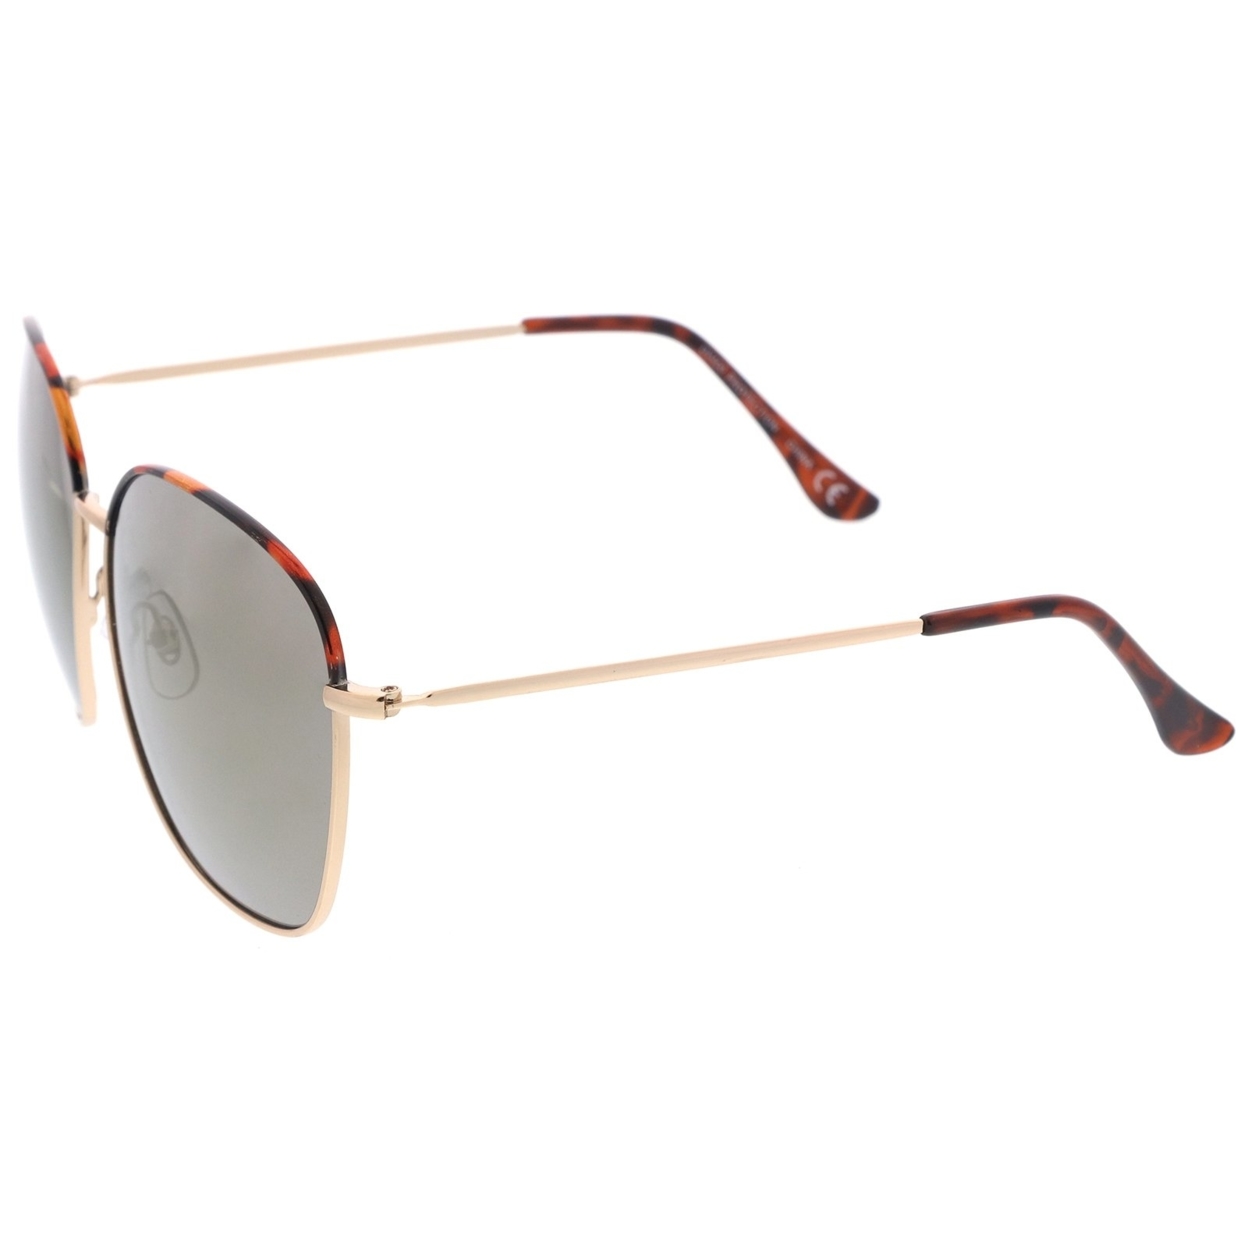 Mod Oversize Two-Toned Metal Frame Slim Temples Square Sunglasses 61mm - Tortoise-Gold / Gold Mirror